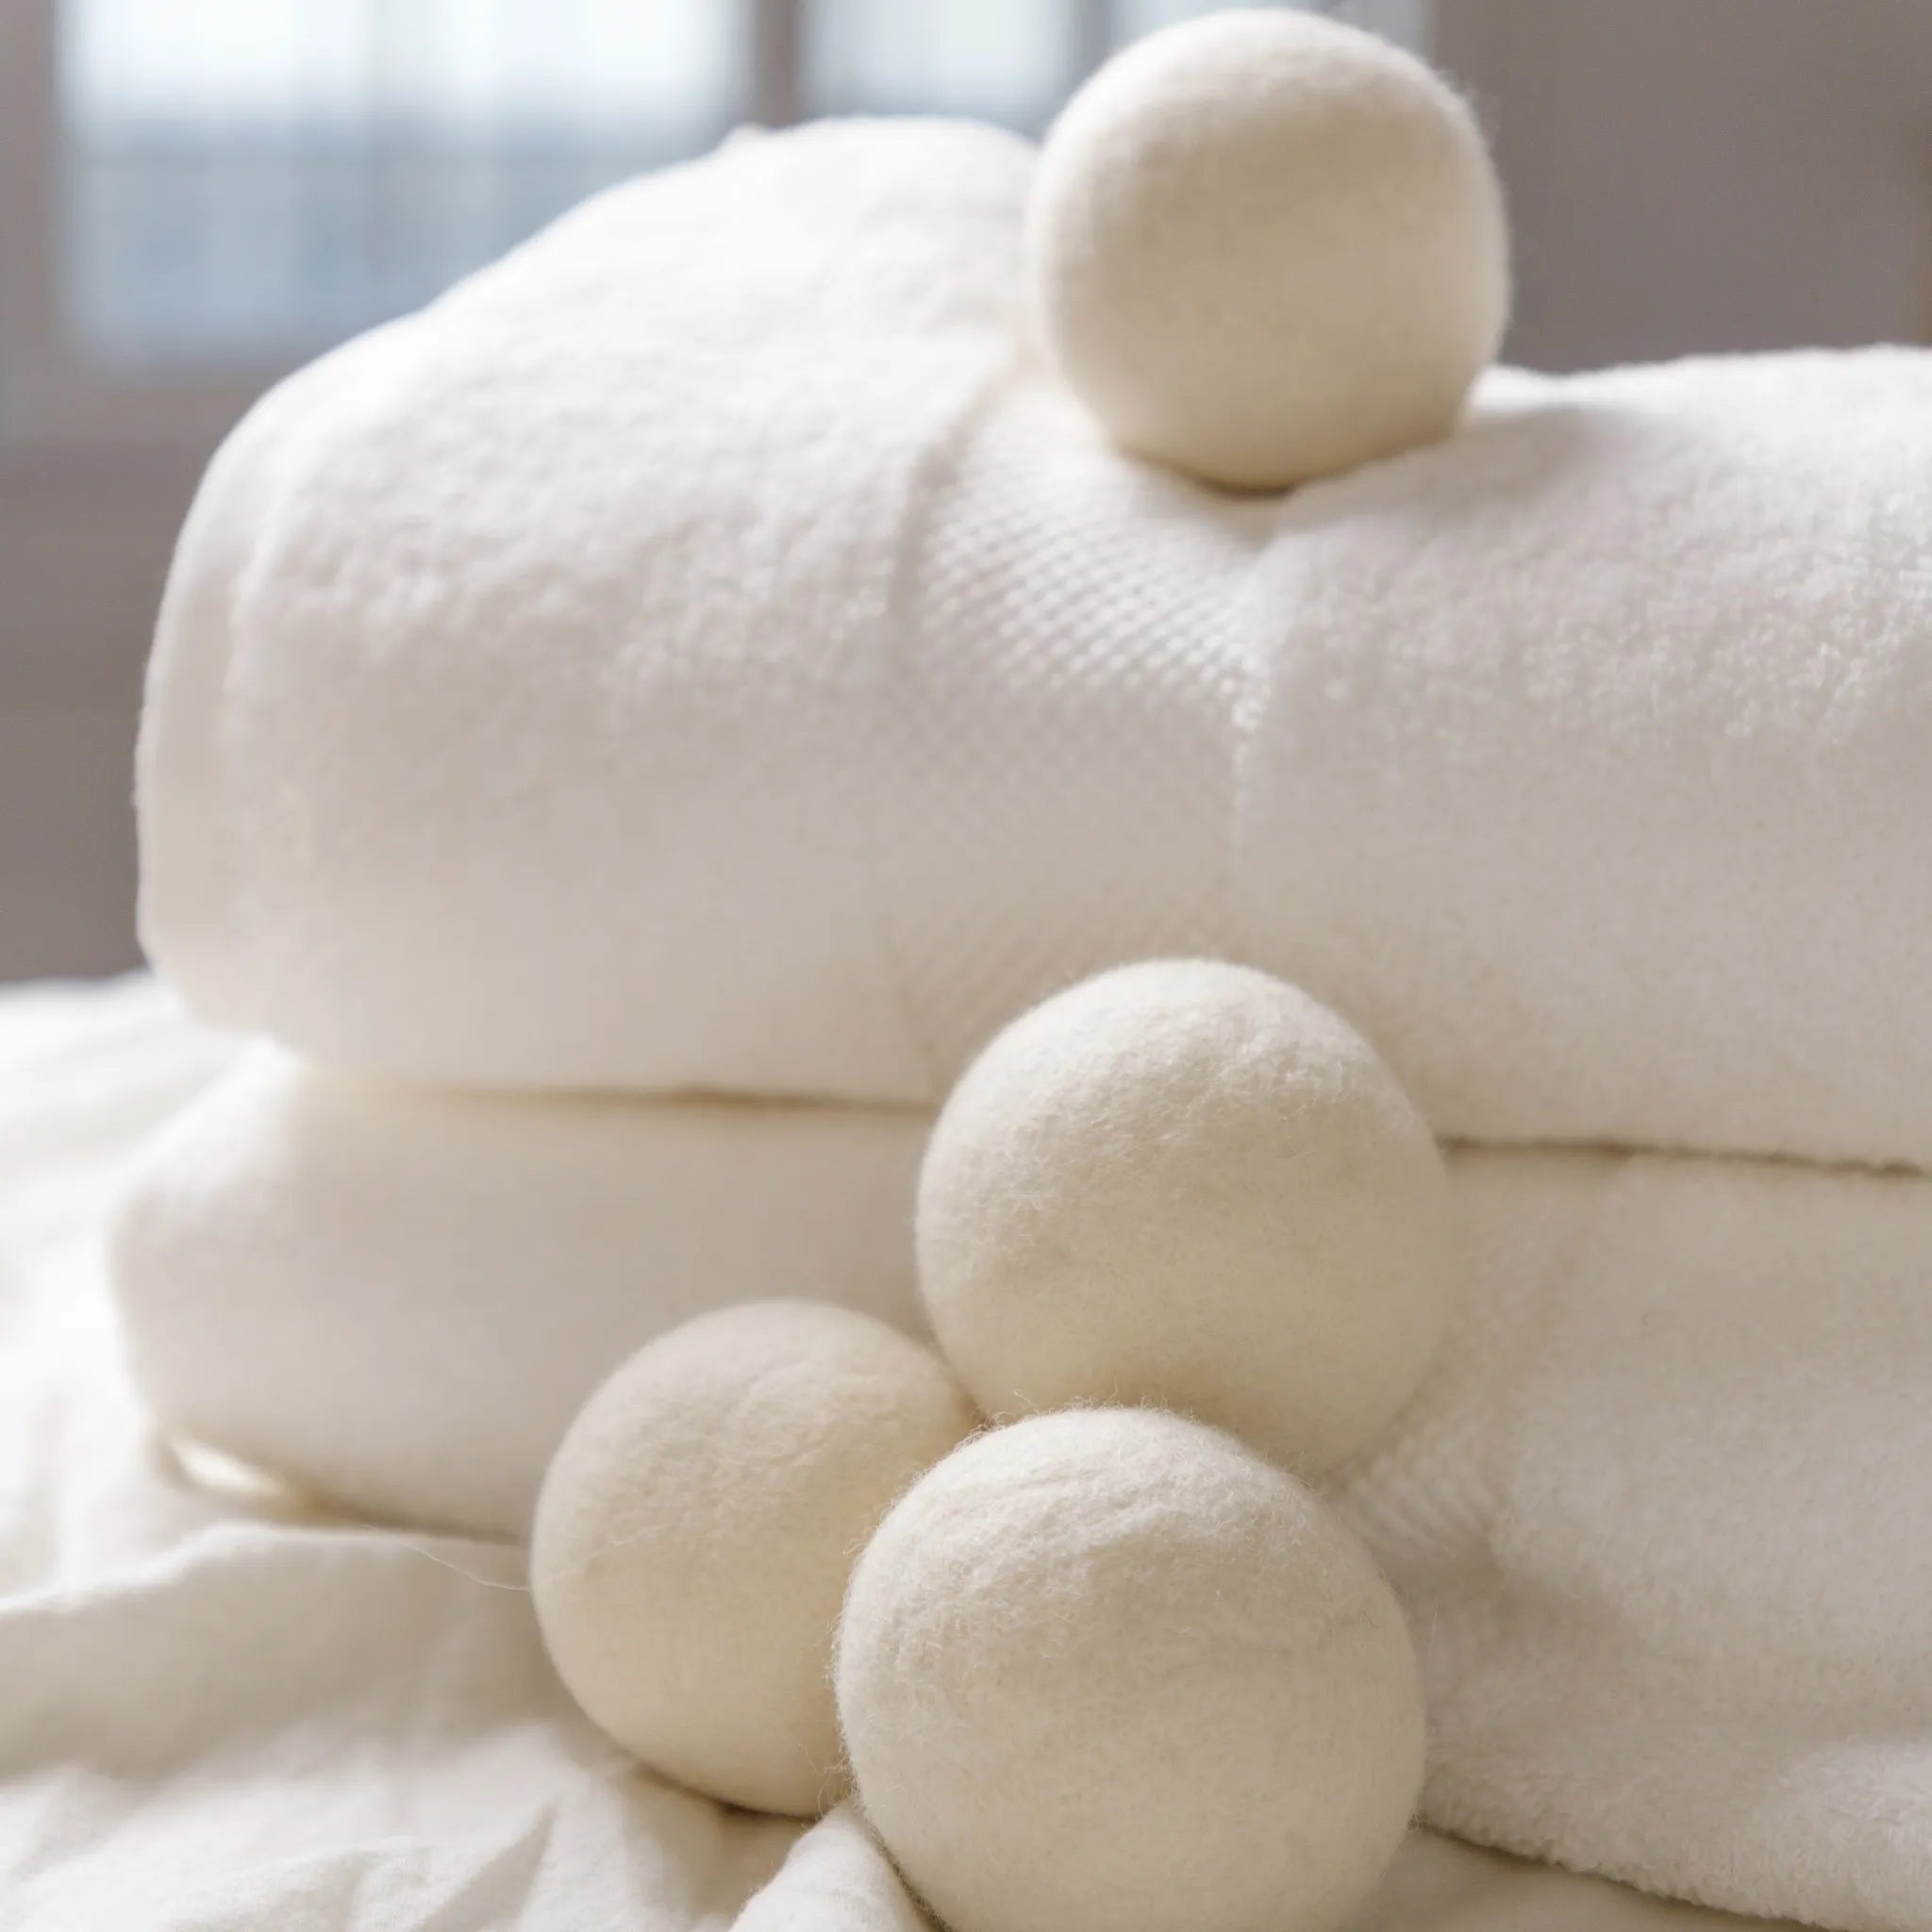 How To Clean Wool Dryer Balls